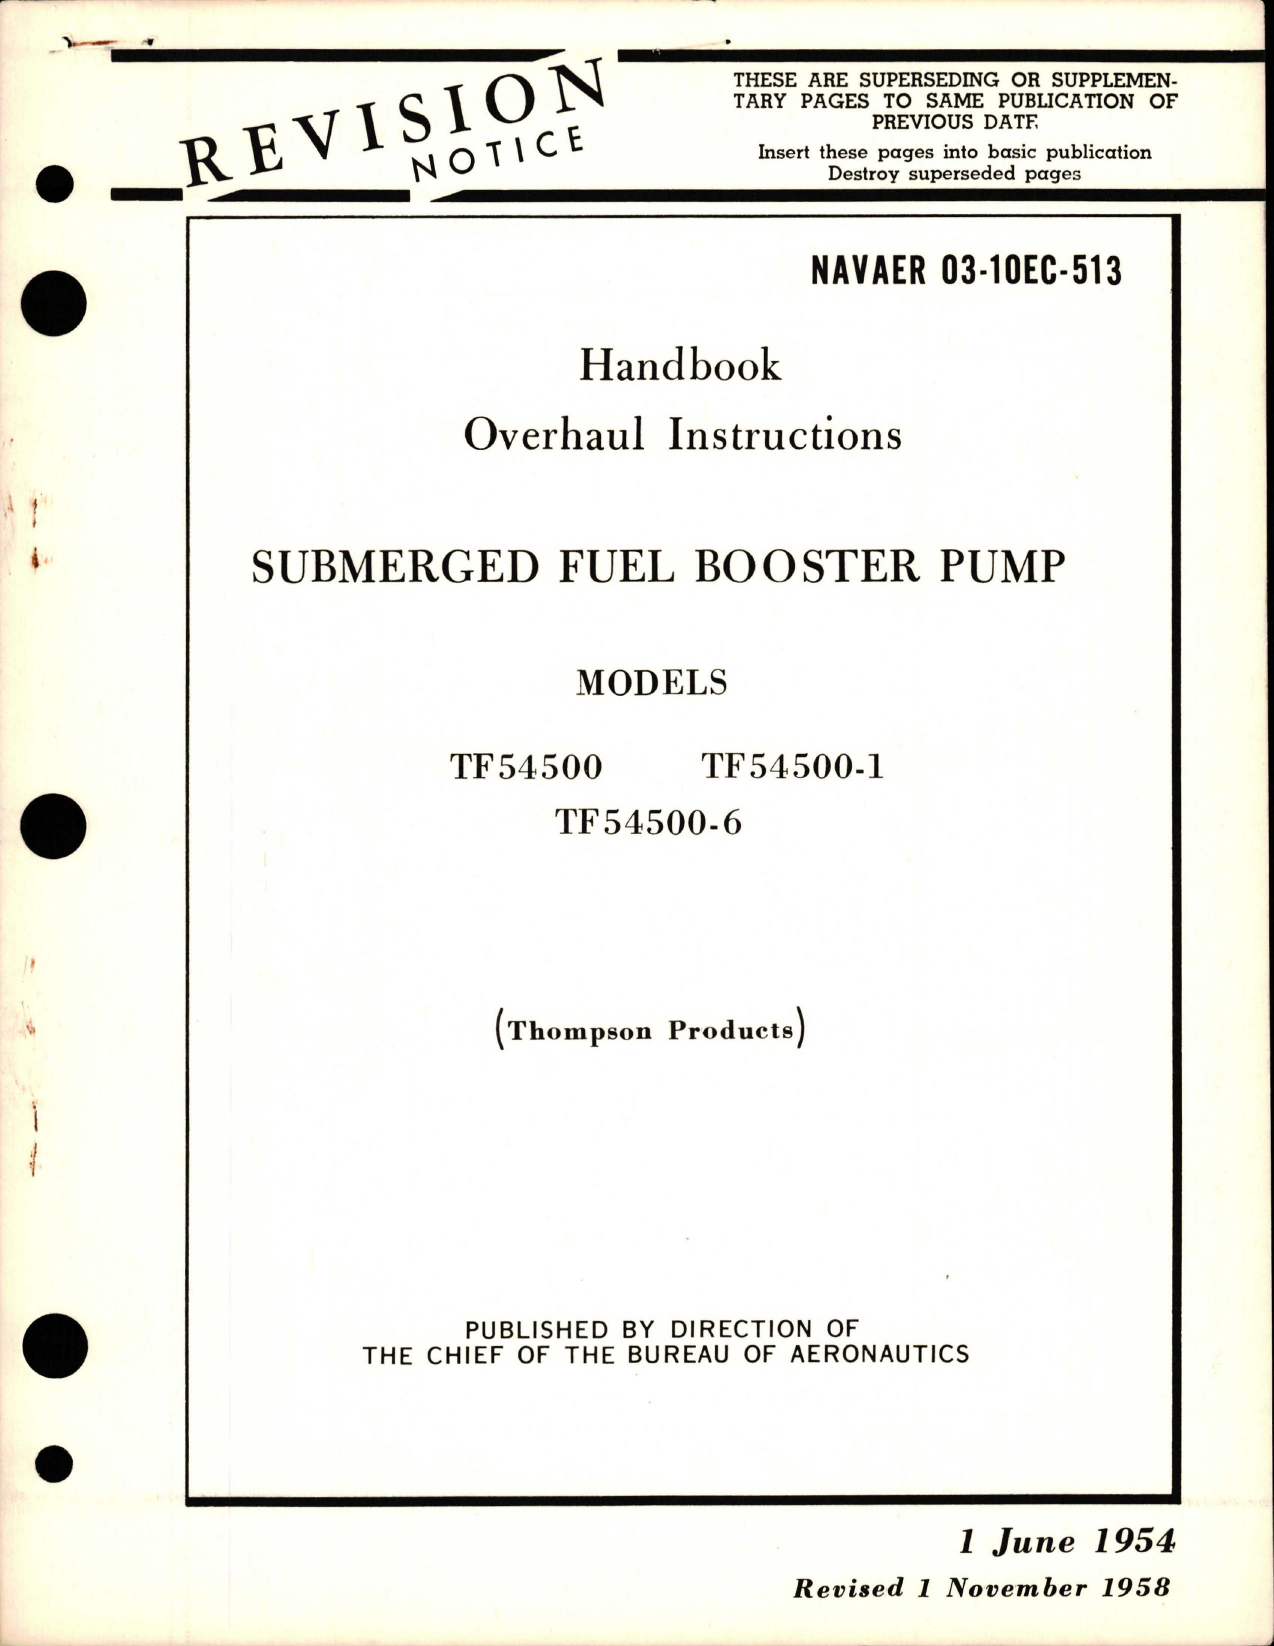 Sample page 1 from AirCorps Library document: Overhaul Instructions for Submerged Fuel Booster Pump - Models TF54500, TF54500-1, TF54500-6